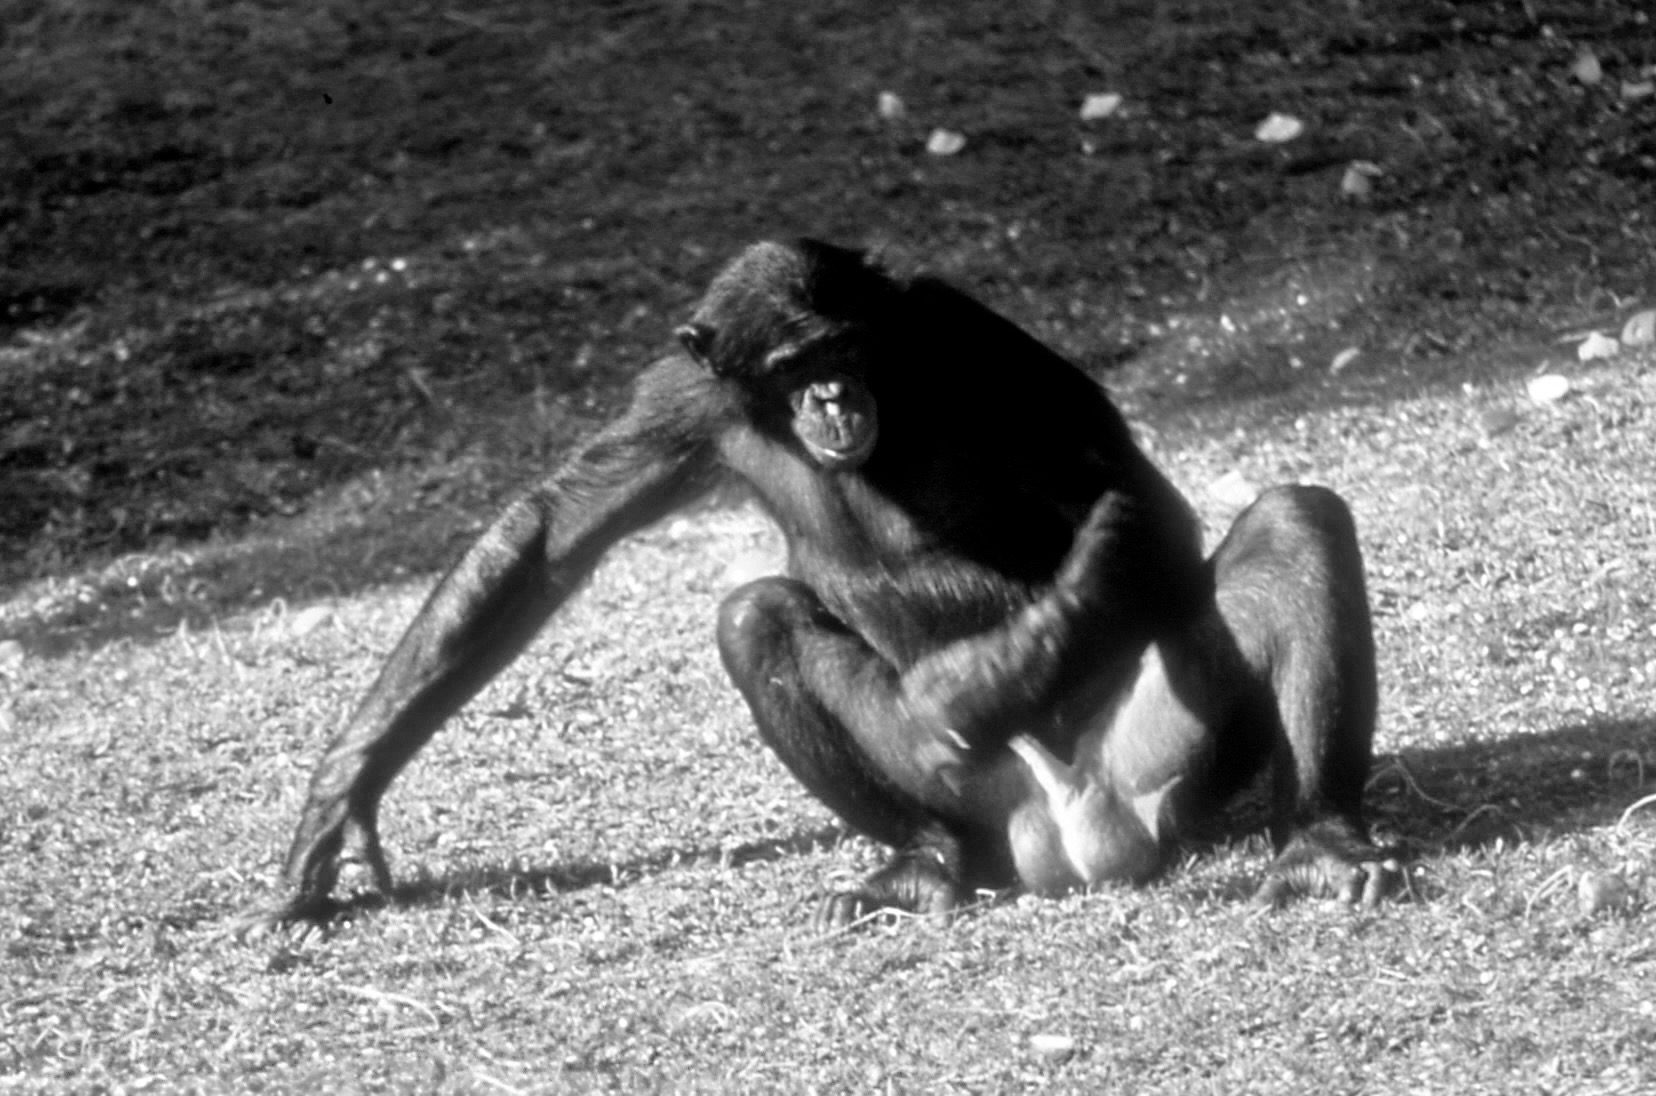 Masturbation has been reported more in male primates than females, but is that because it's harder to spot, male sexuality is more studied, or it's actually more common